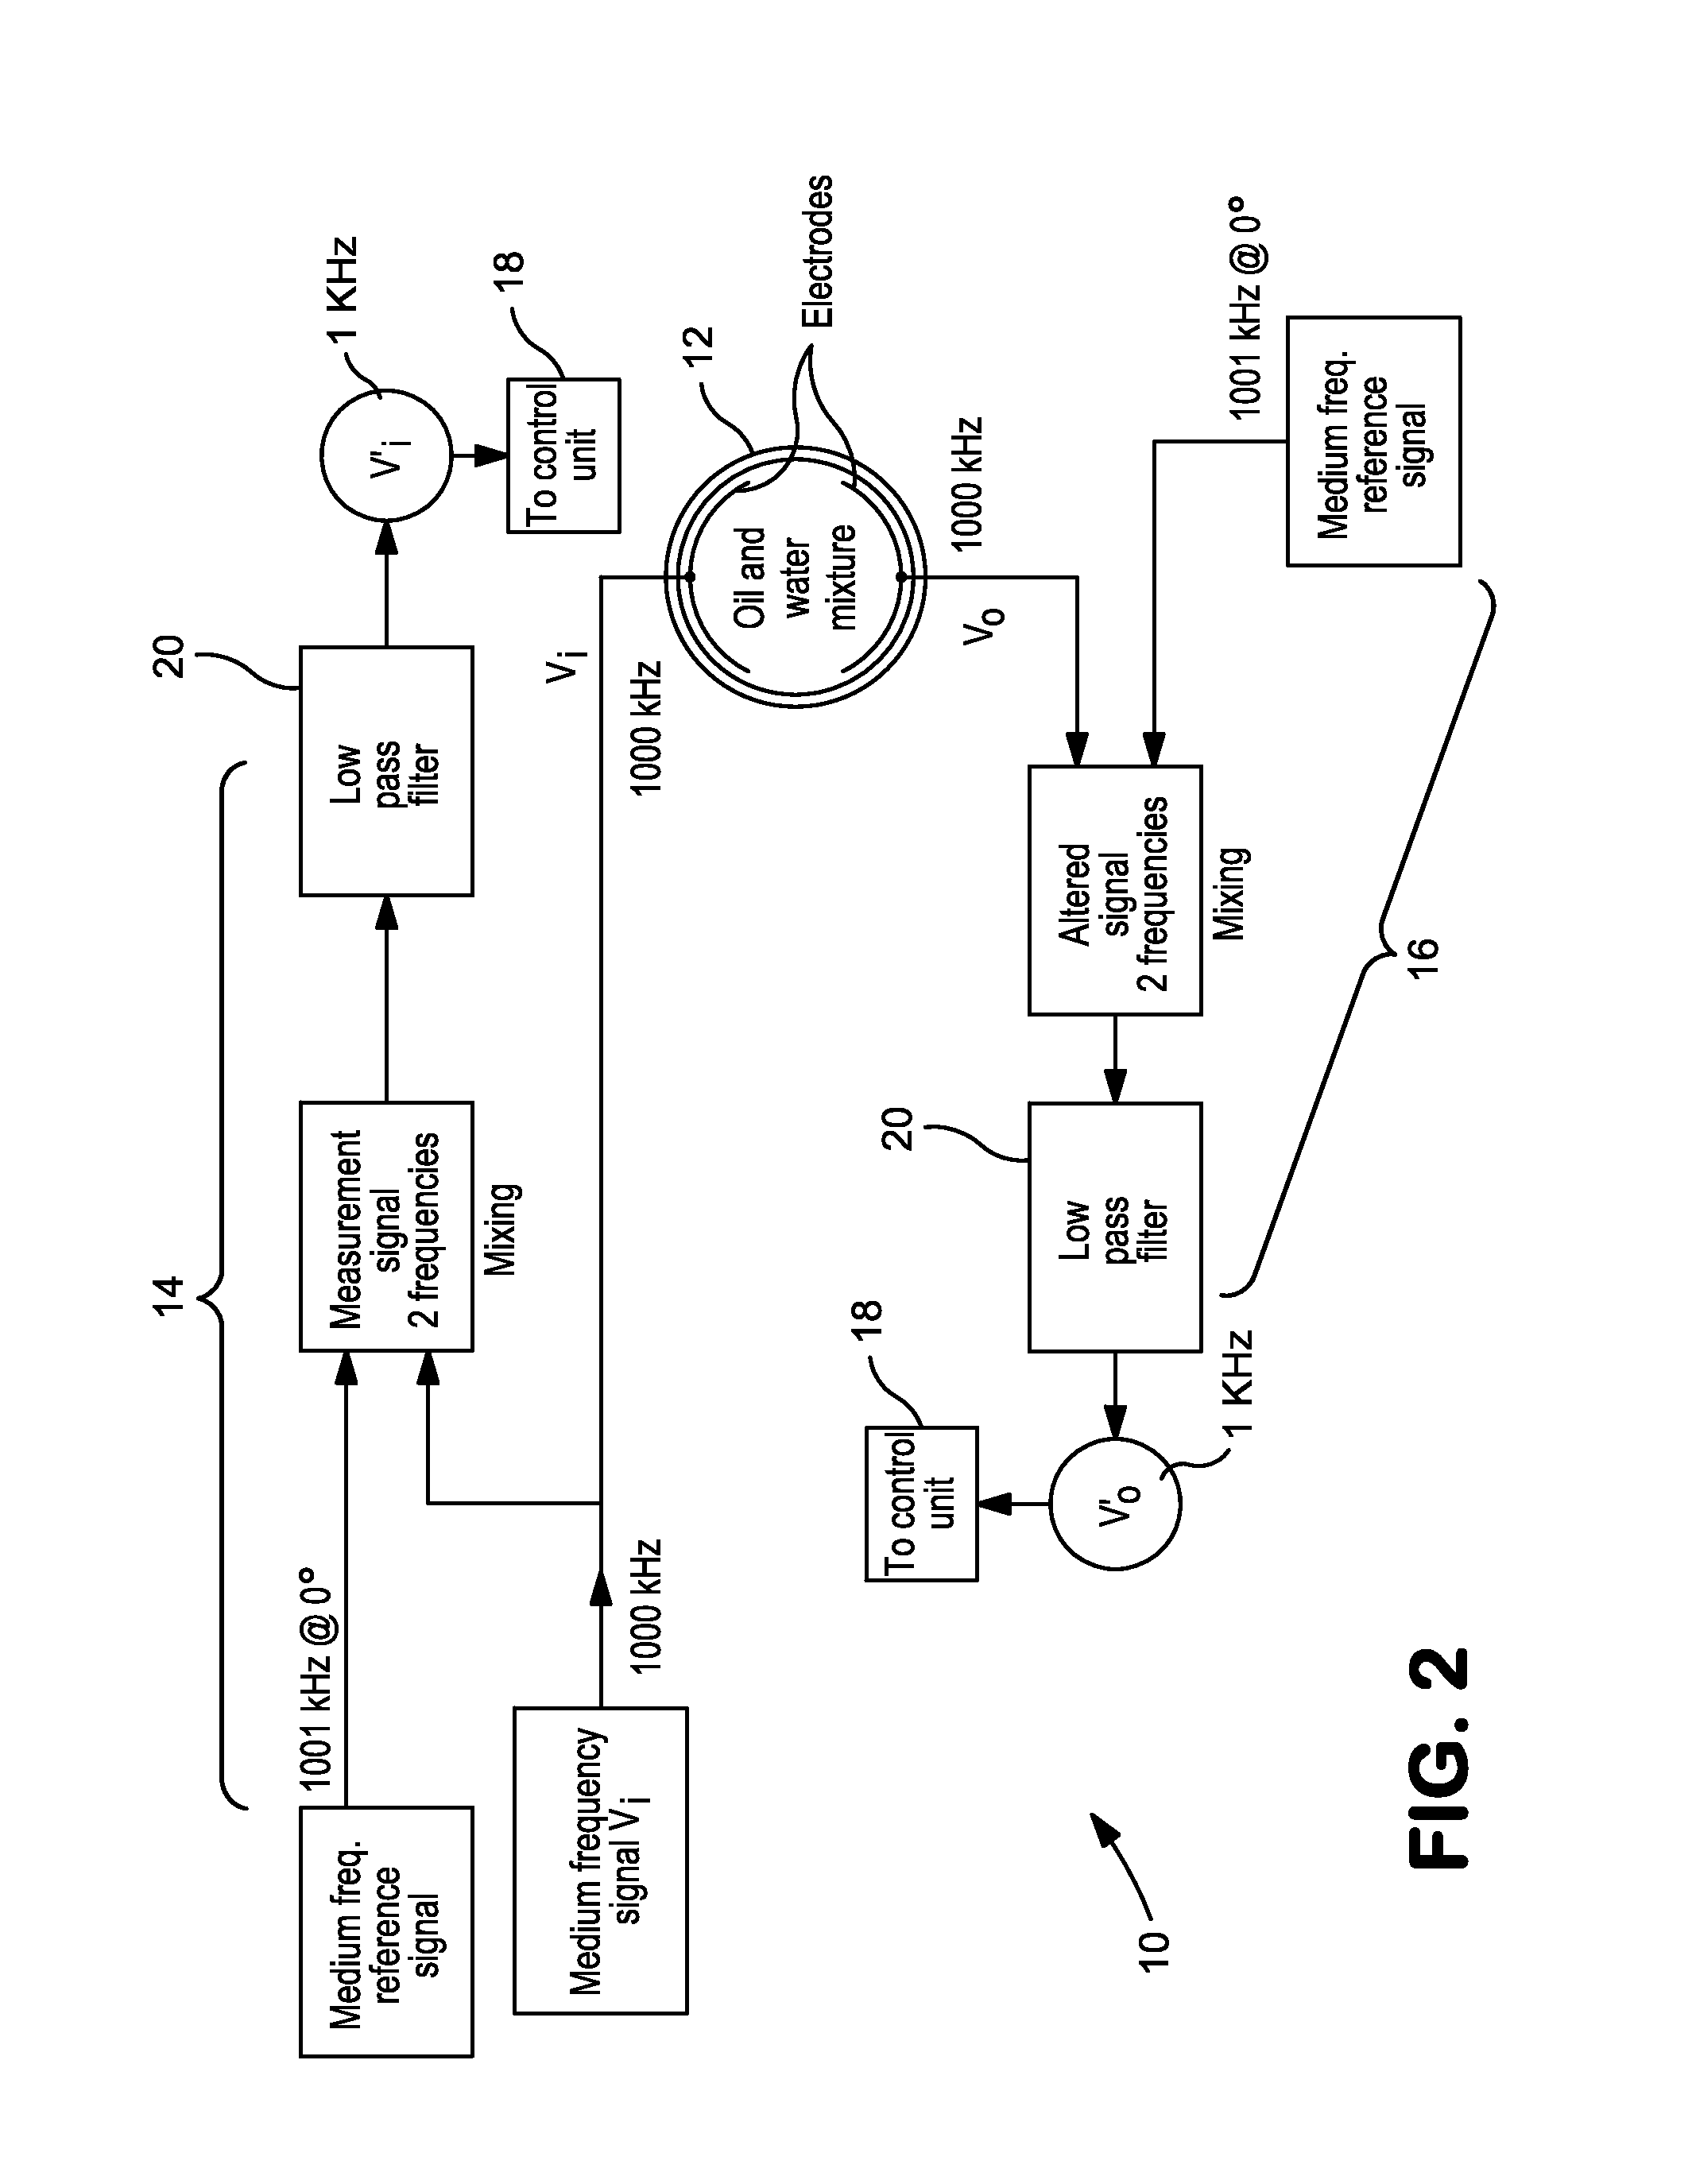 Method and apparatus for determining water content of oil and water mixtures by measurement of specific admittance